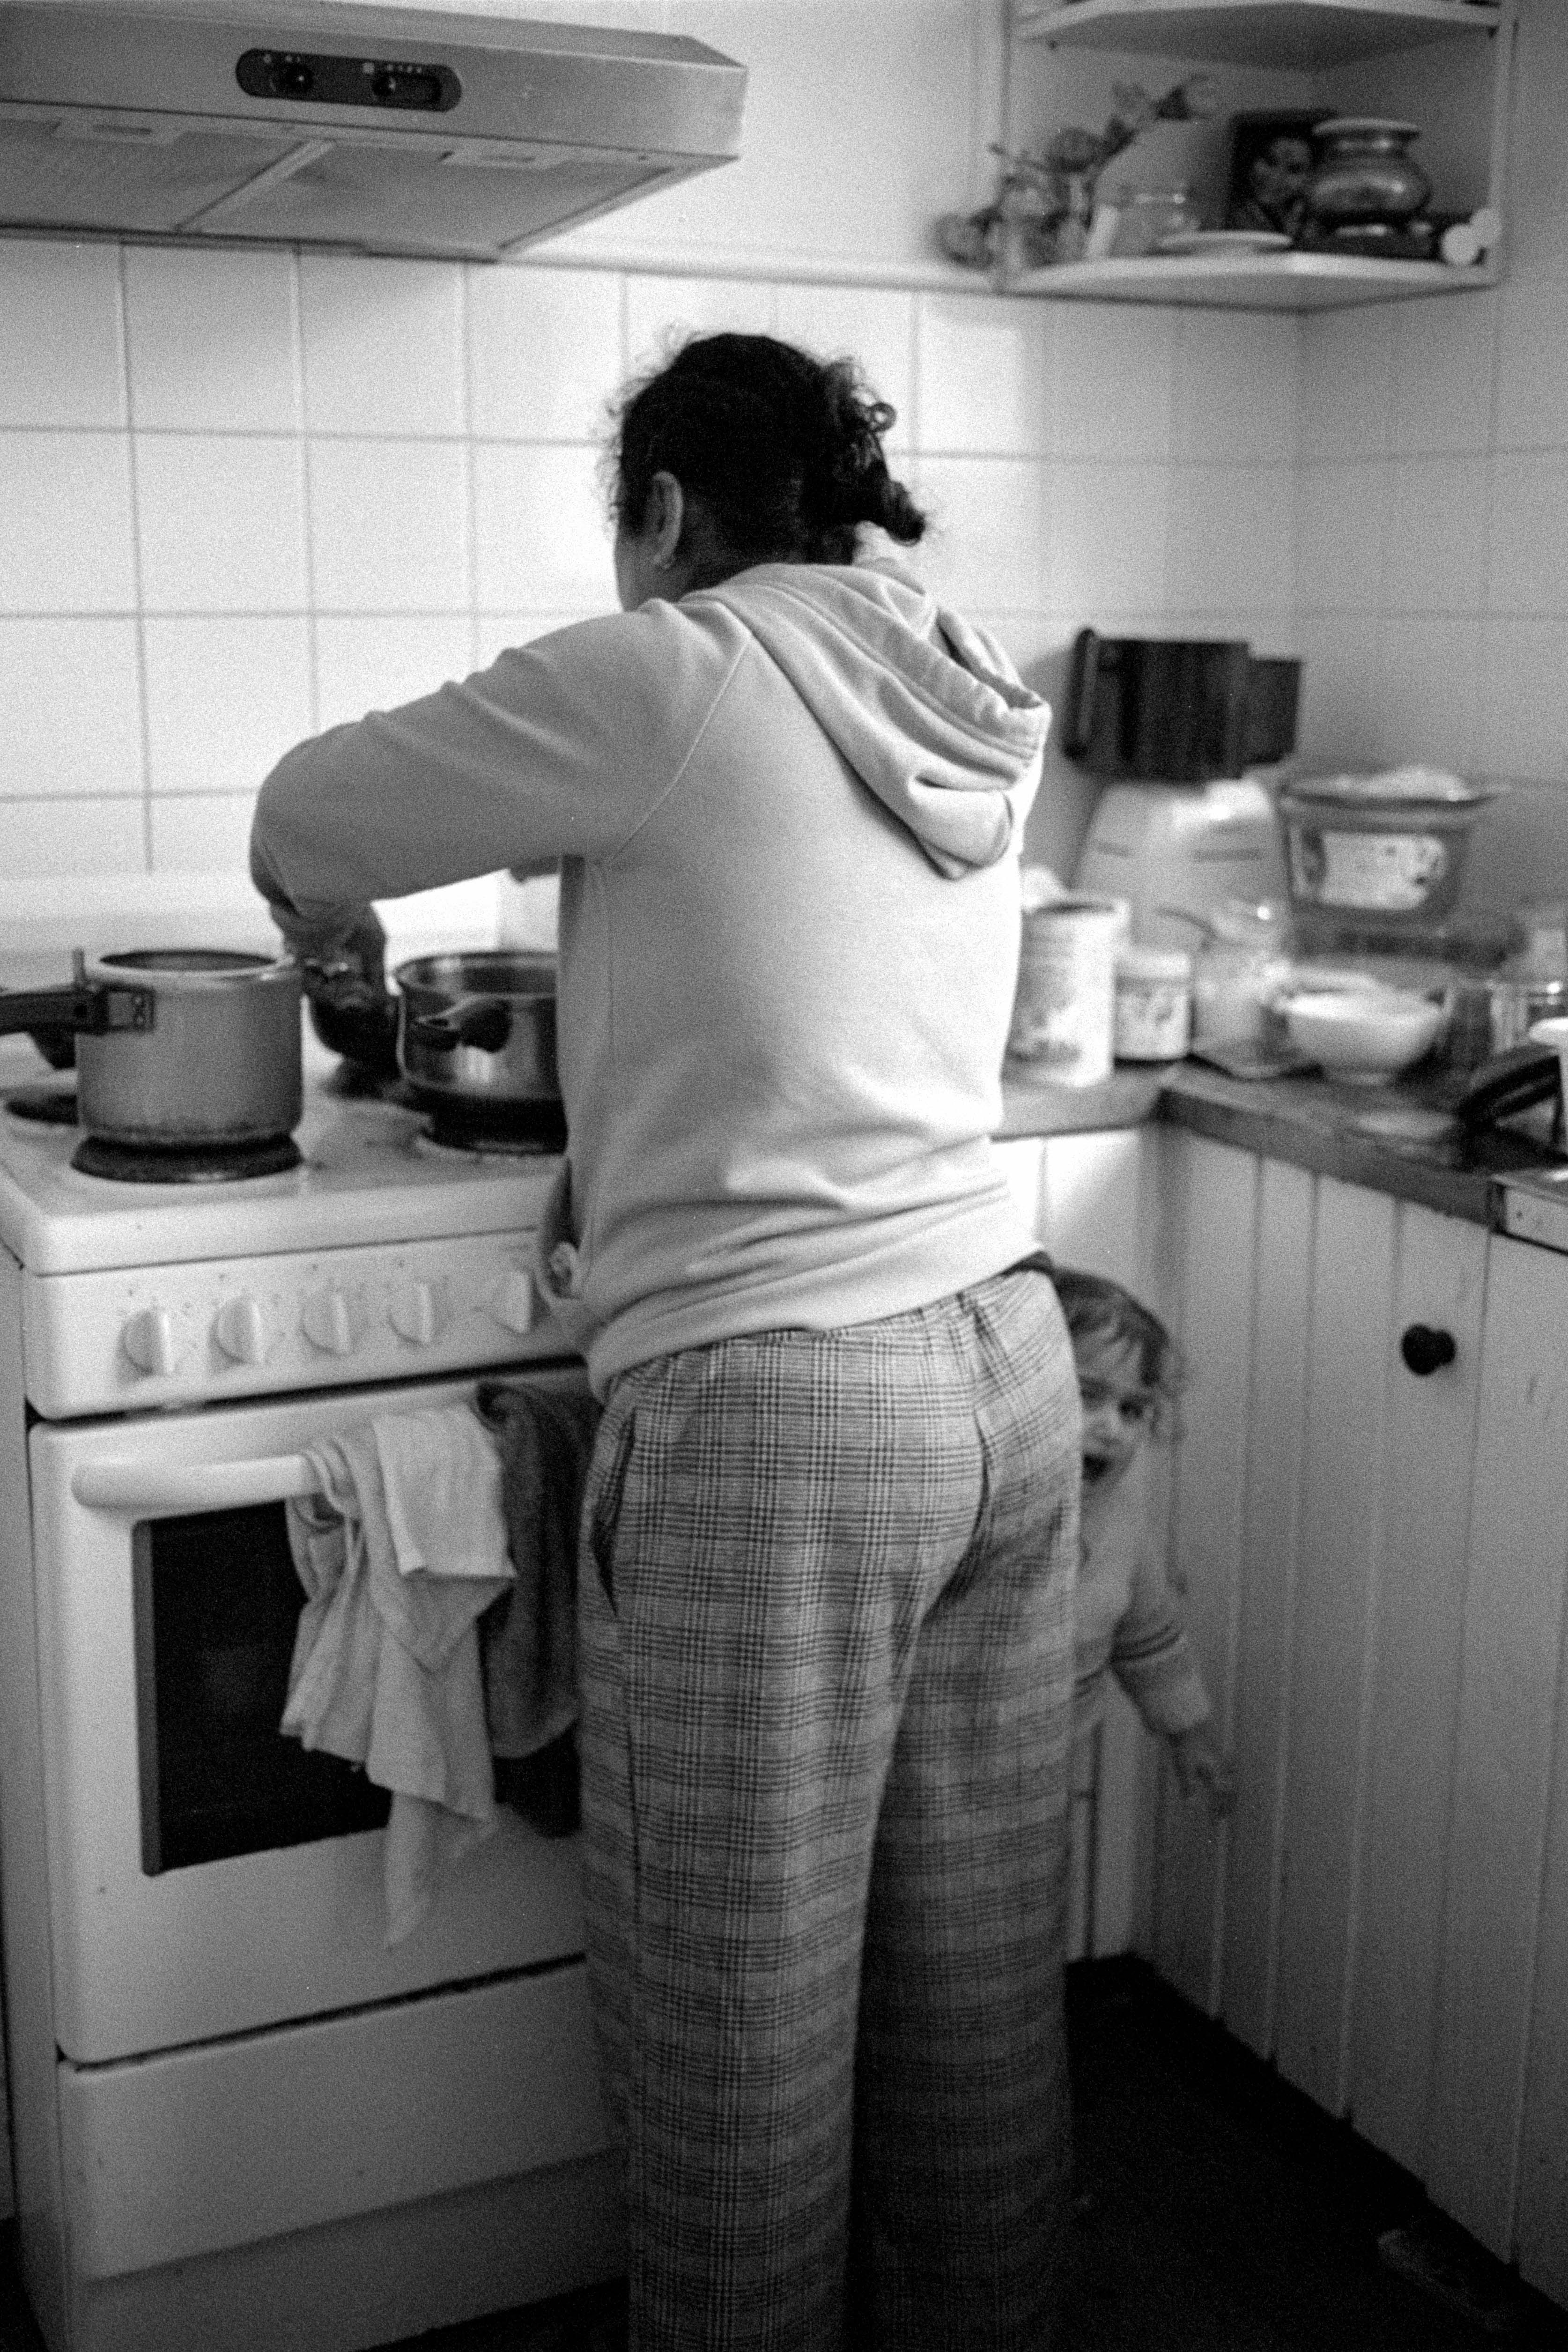 Black and white photograph of a person cooking over a stove in the kitchen, with a small child next to their leg